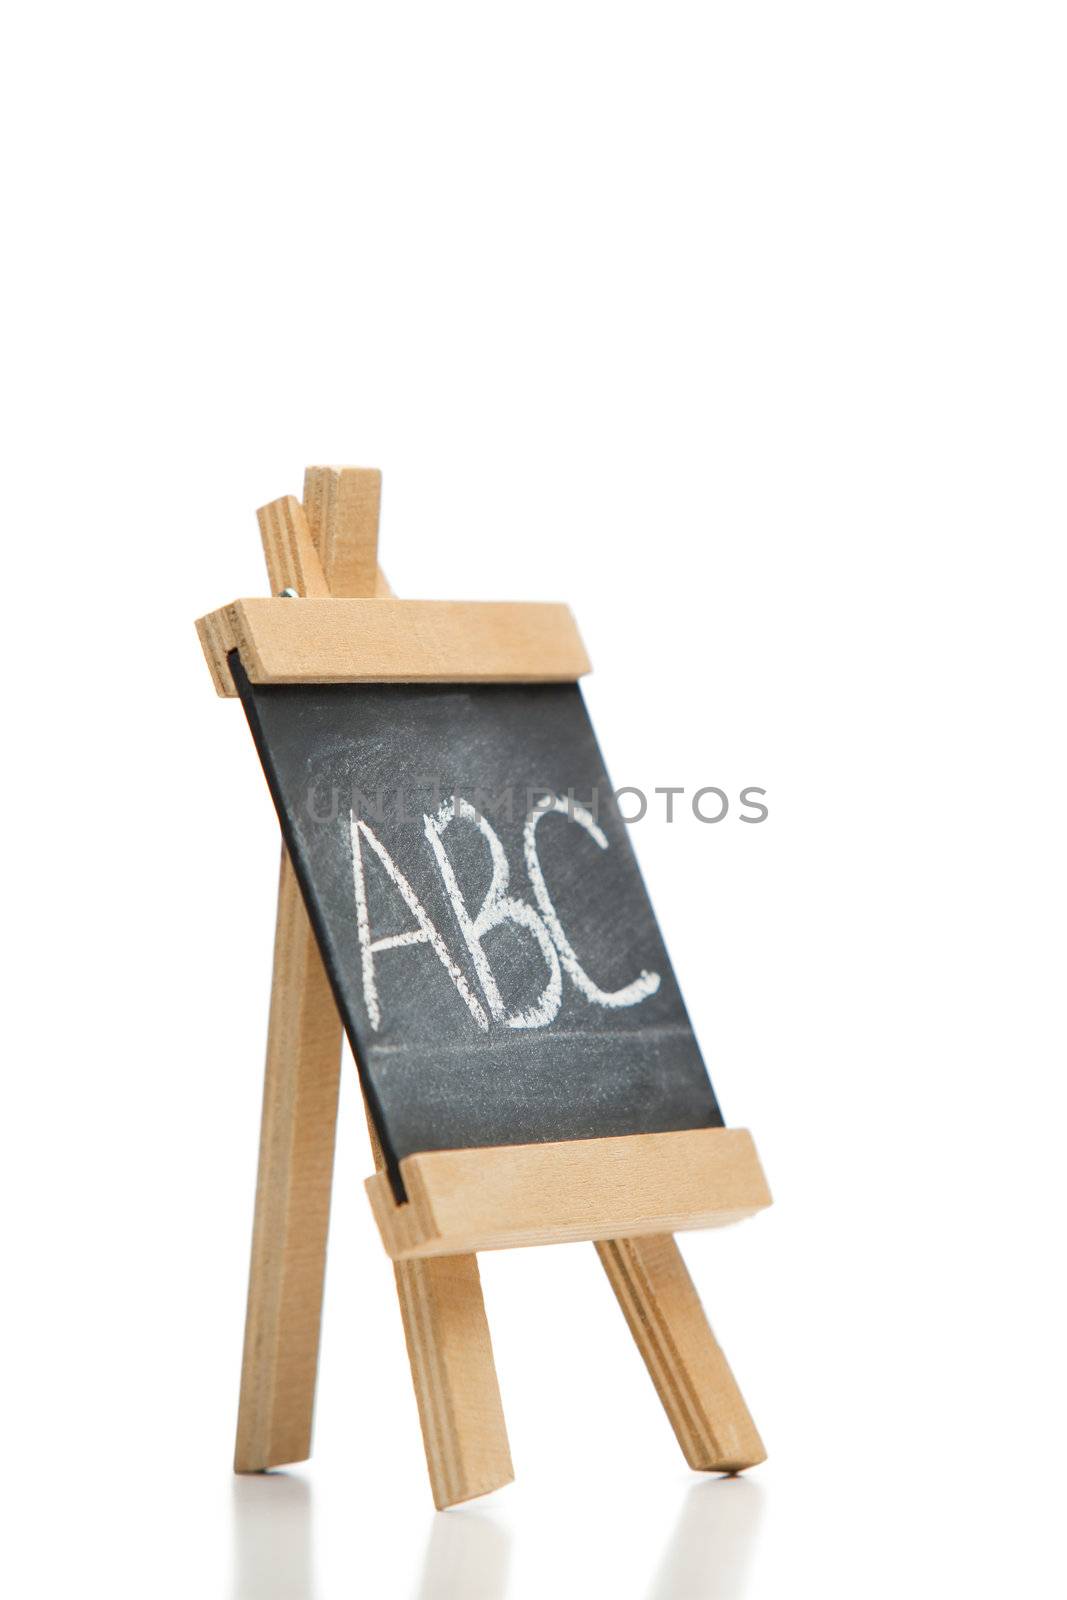 Angled chalkboard with the letters abc written on it by Wavebreakmedia